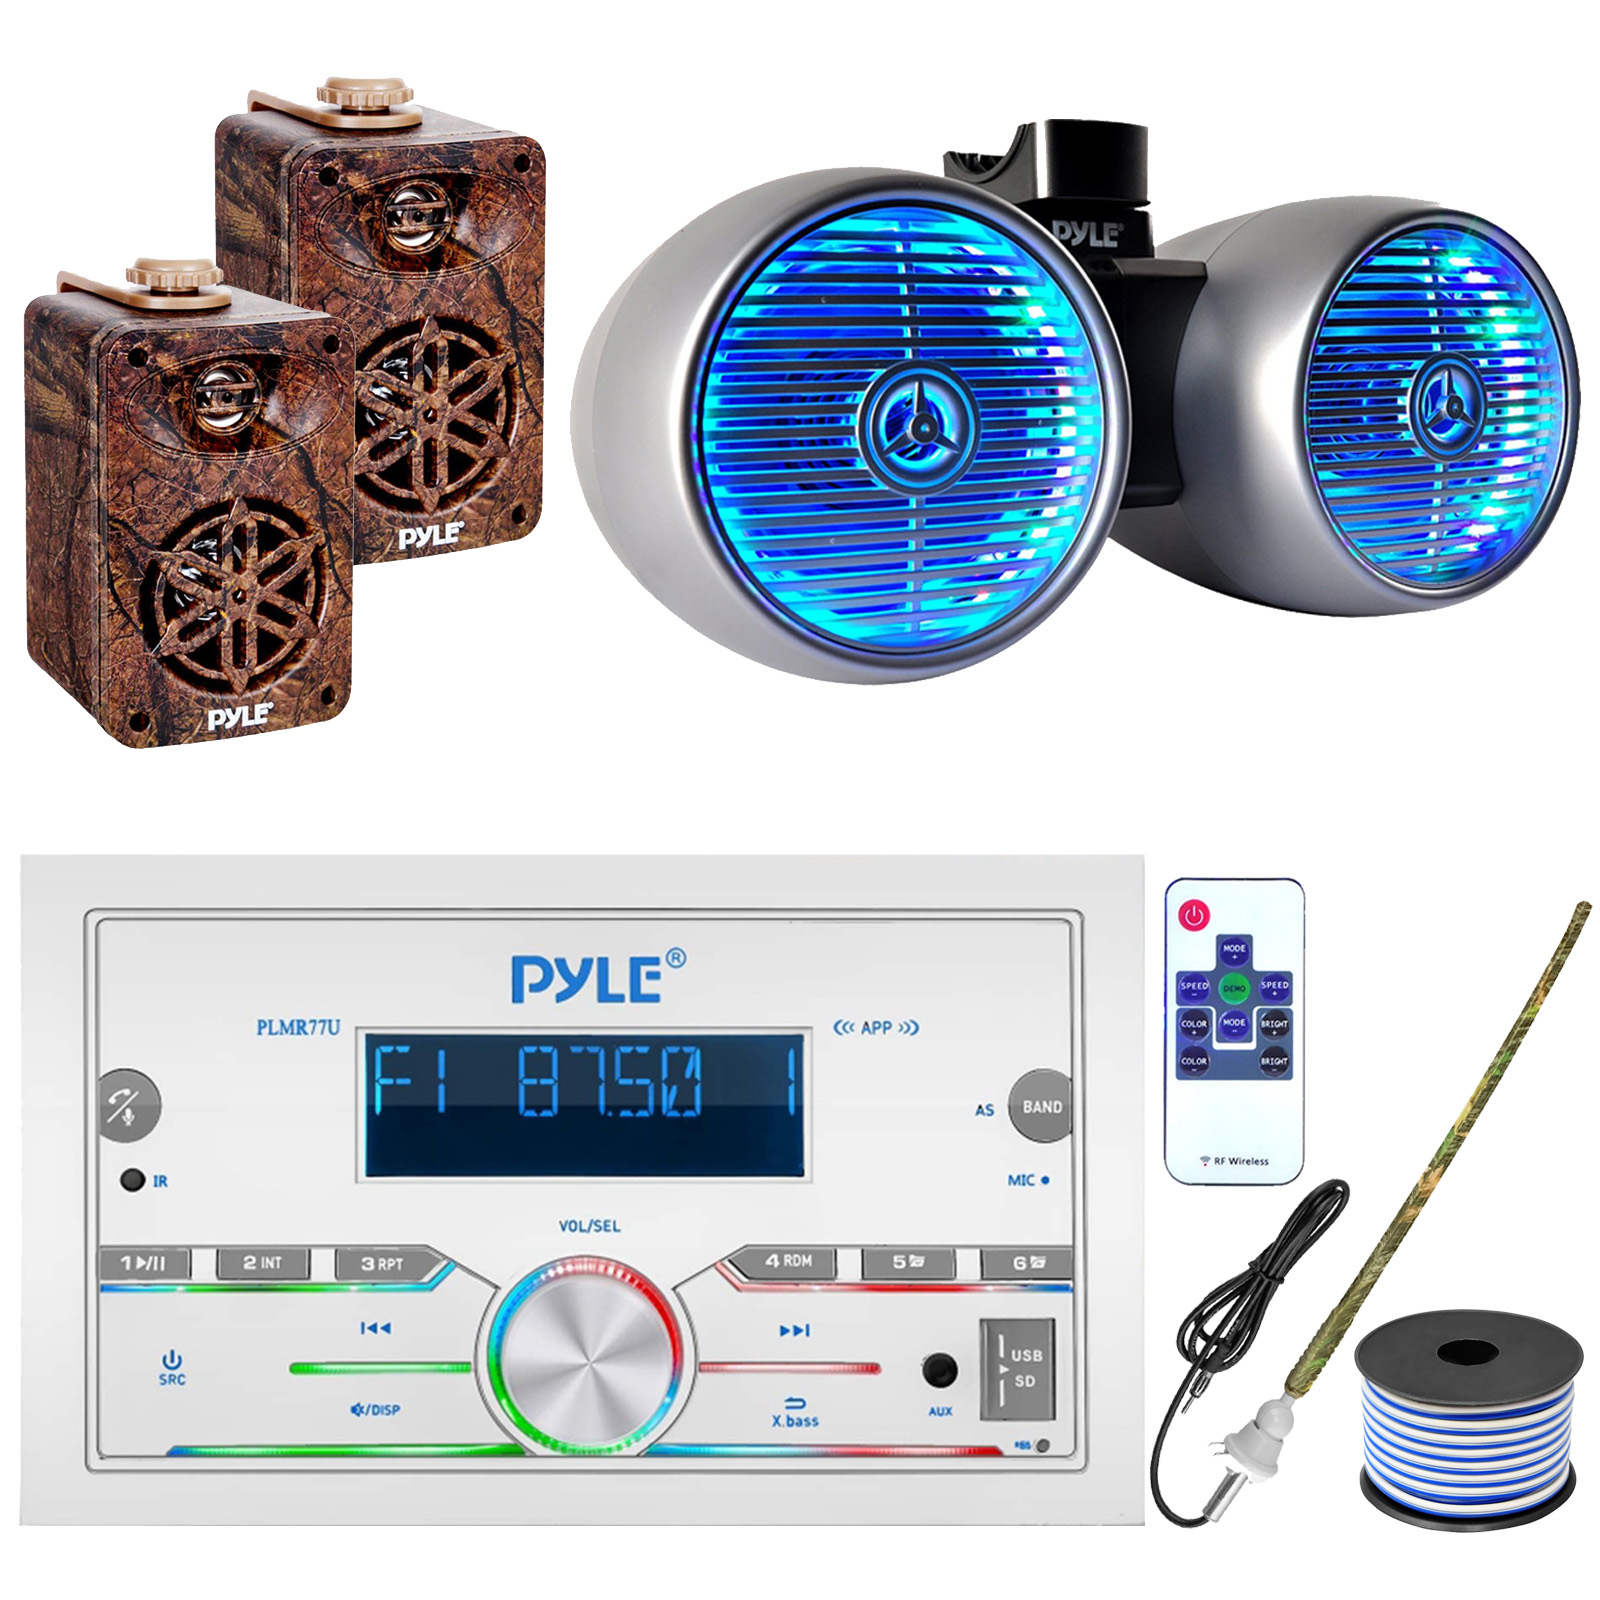 Pyle PLMR77U Double DIN AM/FM Stereo USB/AUX Bluetooth Marine Power Receiver with 6.5" 400W Wakeboard Silver Marine LED Speakers, 2x 3.5” Indoor/Outdoor Camo Speakers, Radio Antenna, 18 Gauge Wire - image 1 of 6